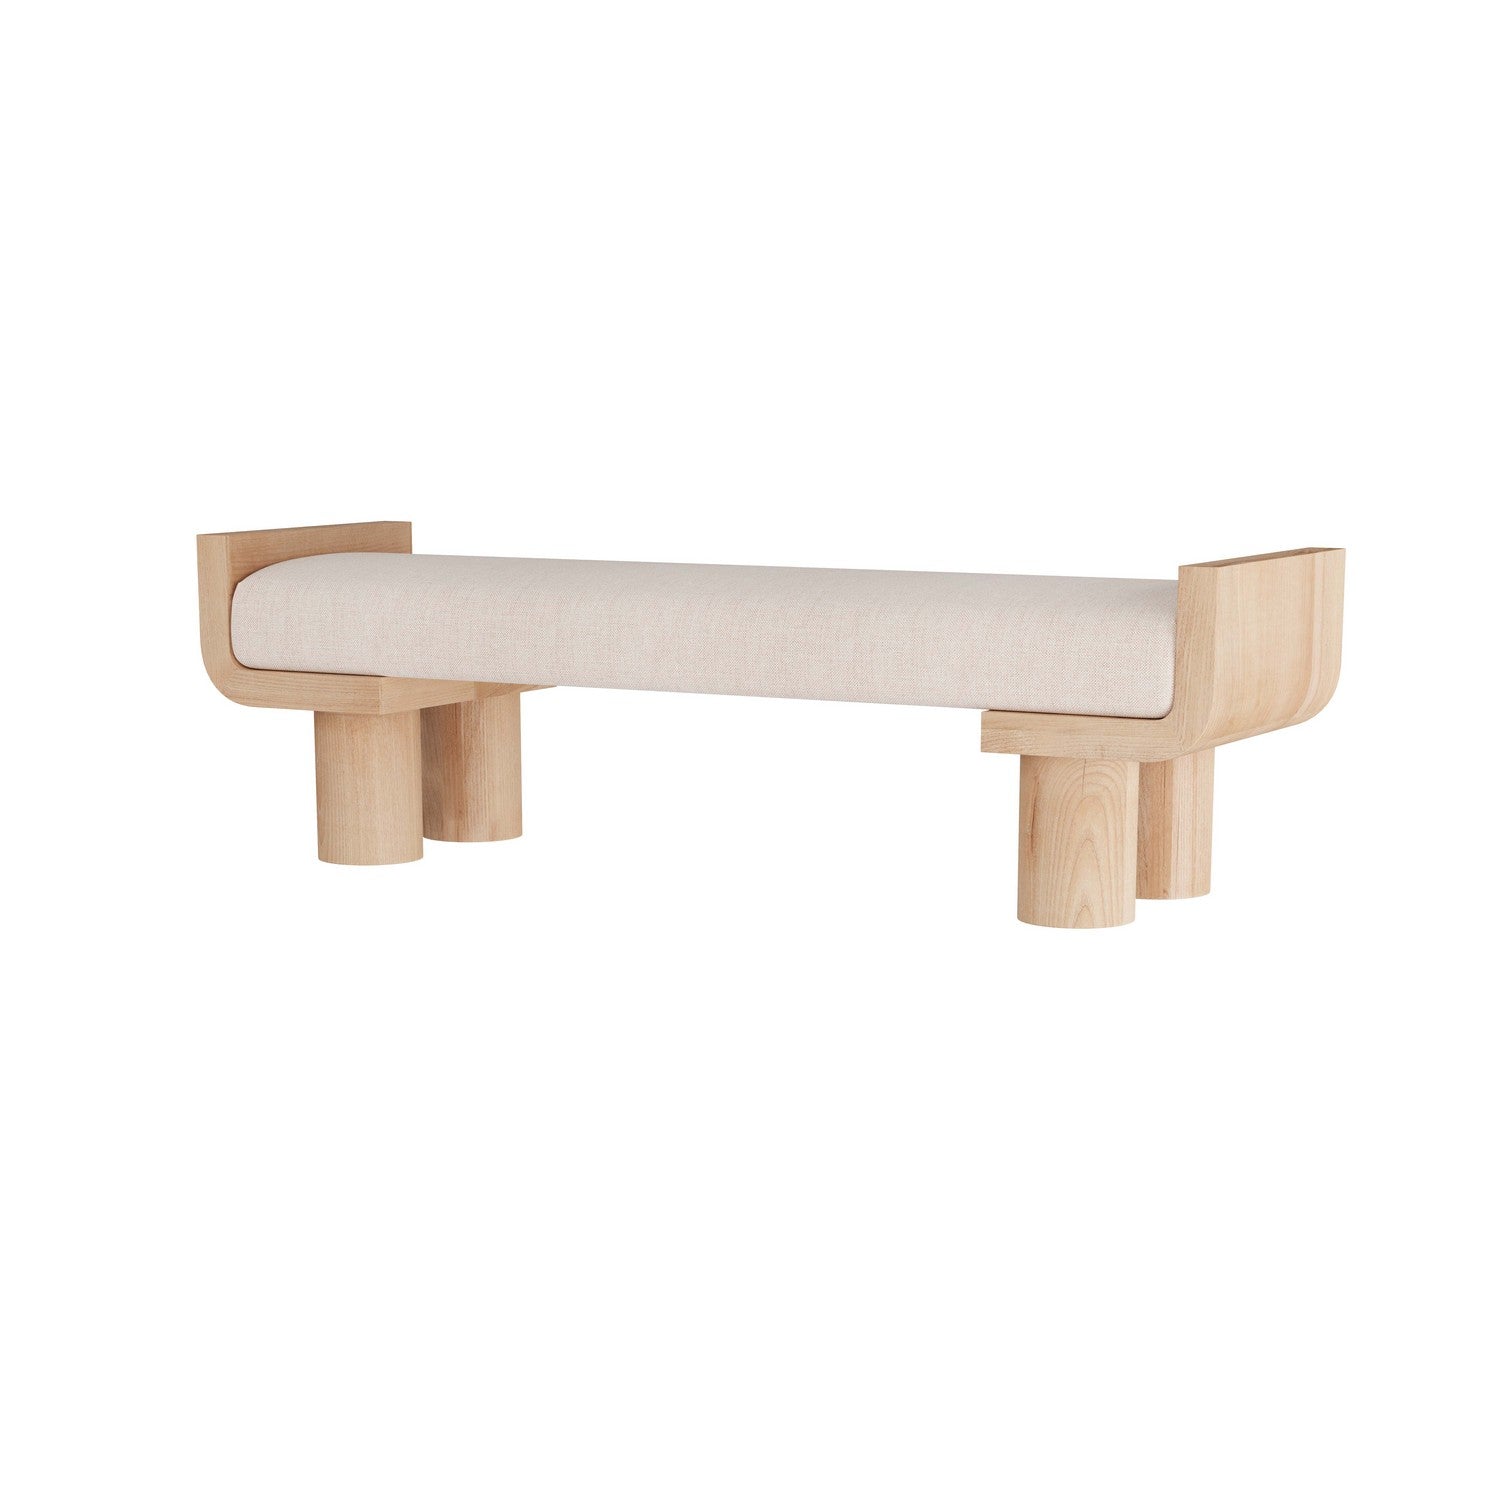 Bench from the Wesley collection in Natural finish